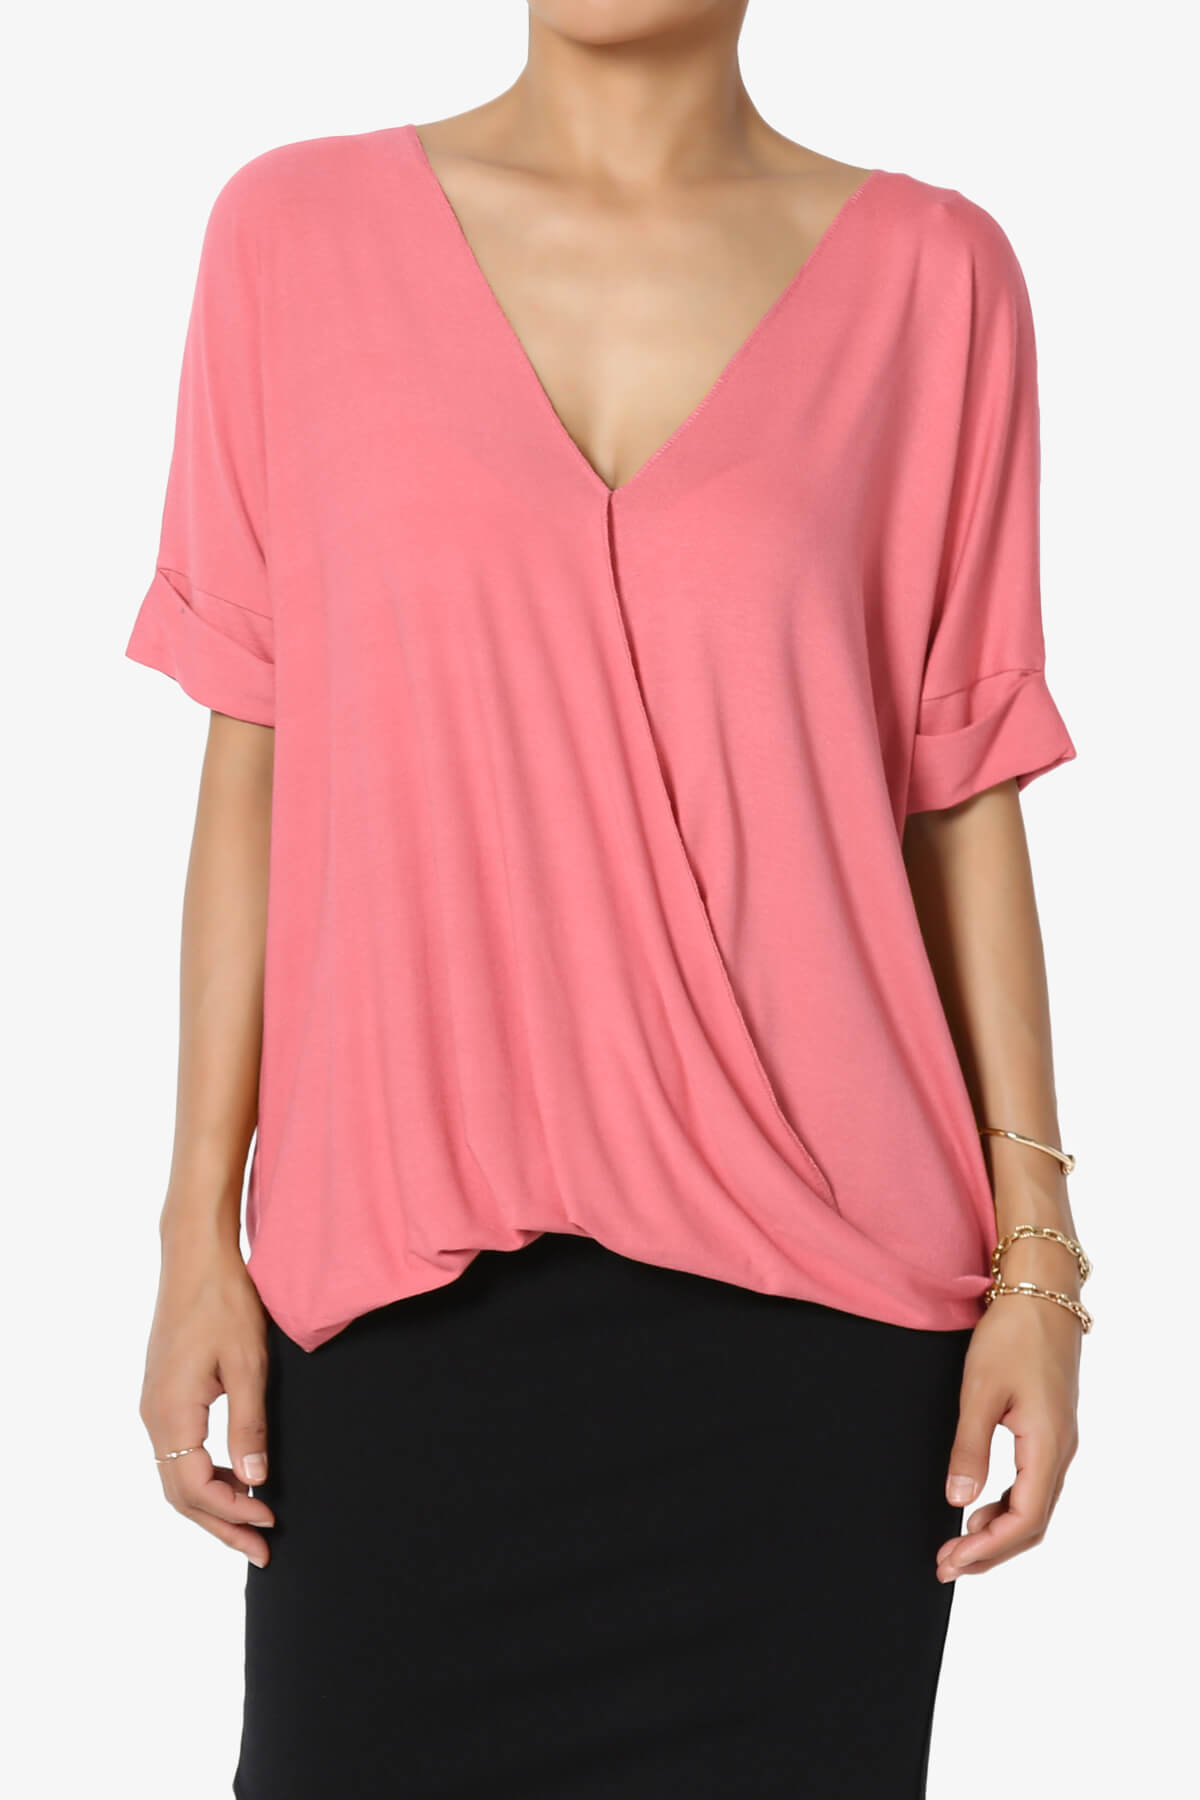 Load image into Gallery viewer, Tackle Wrap Hi-Low Crepe Knit Top DESERT ROSE_1
